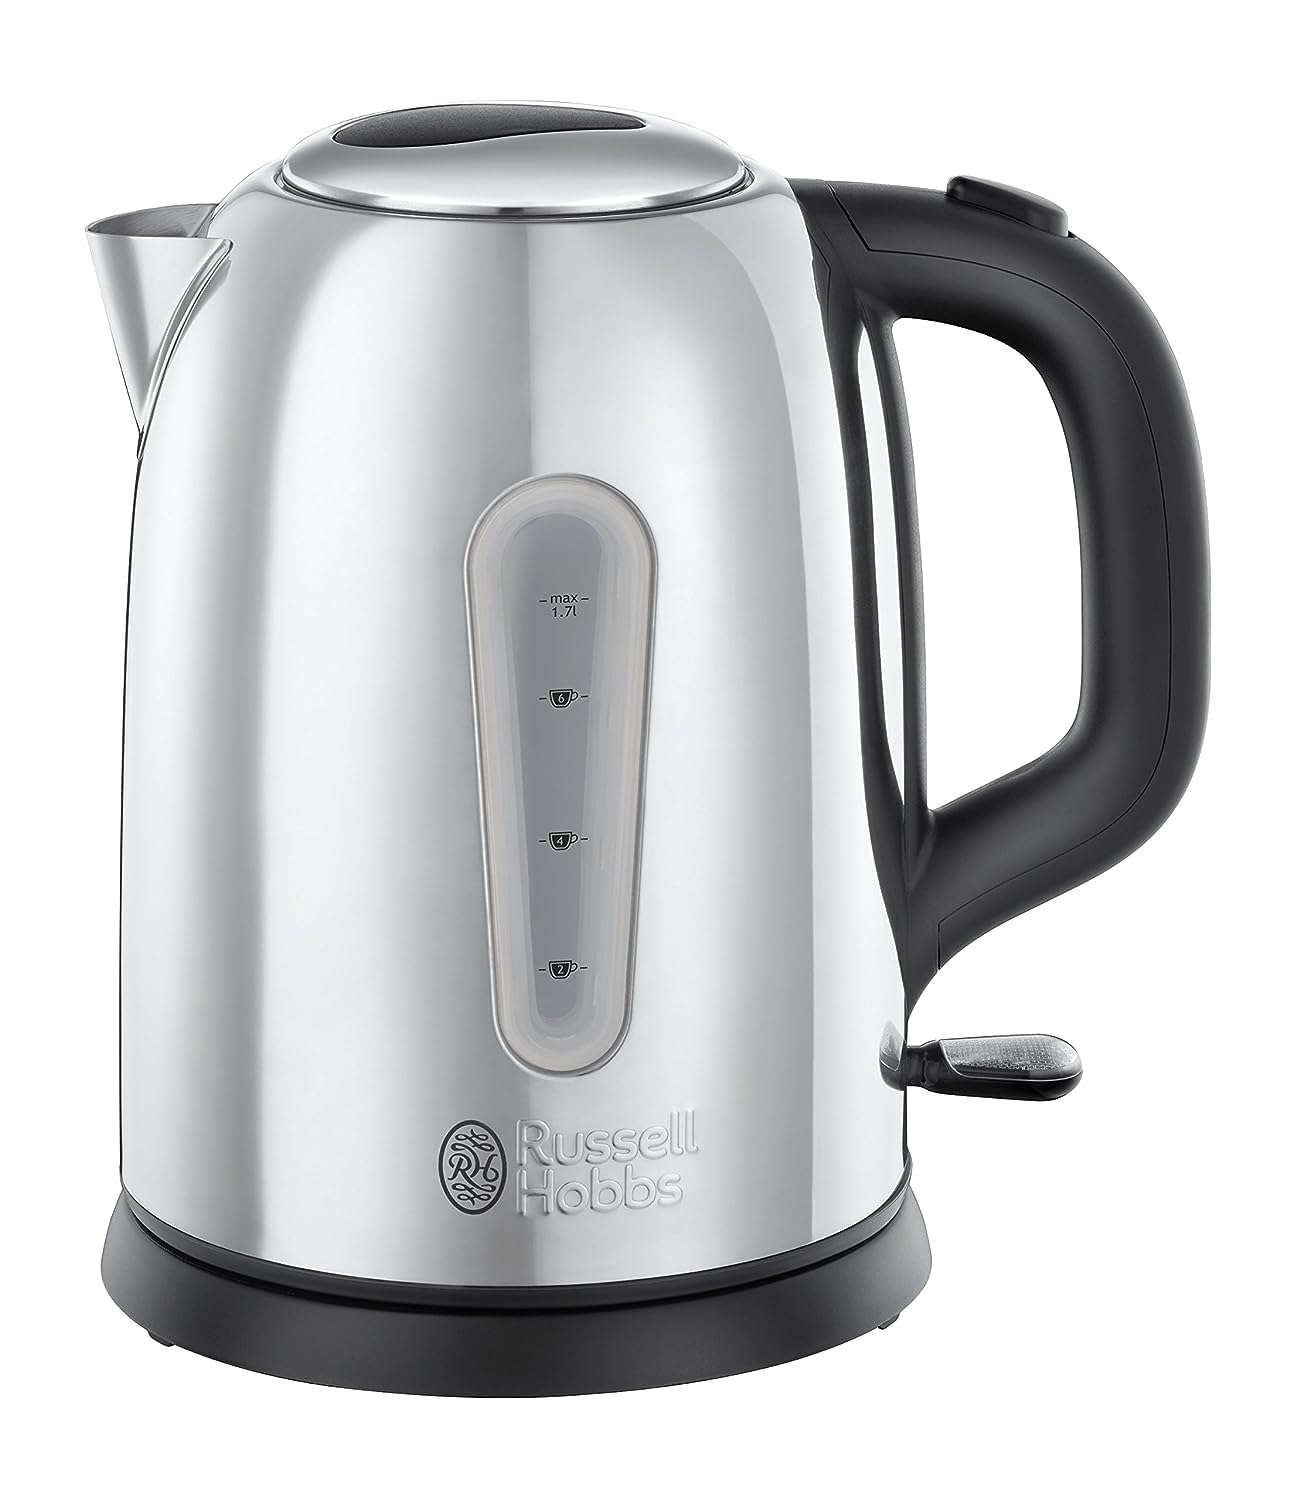 Russell Hobbs Coniston Electric Kettle, 1.7L Capacity 3000W Sleek Stainless Steel Design with Rapid Boil, Removable Filter, Perfect for Warm Beverages for Home & Office use – 23760 (Silver)